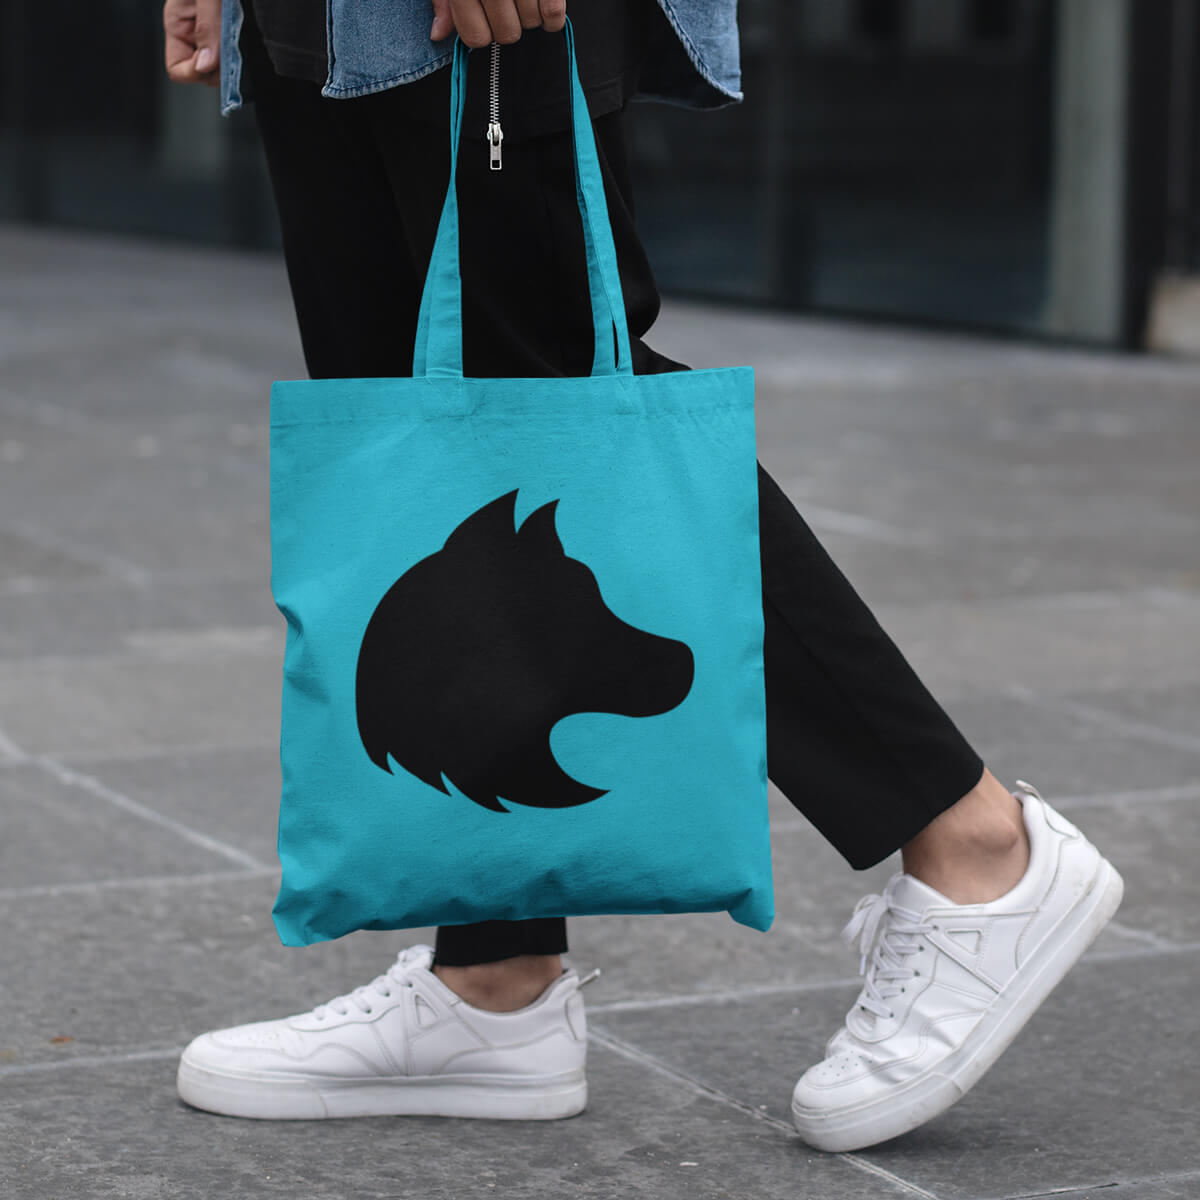 Turquoise with black imprint custom promotional tote bags by curative printing